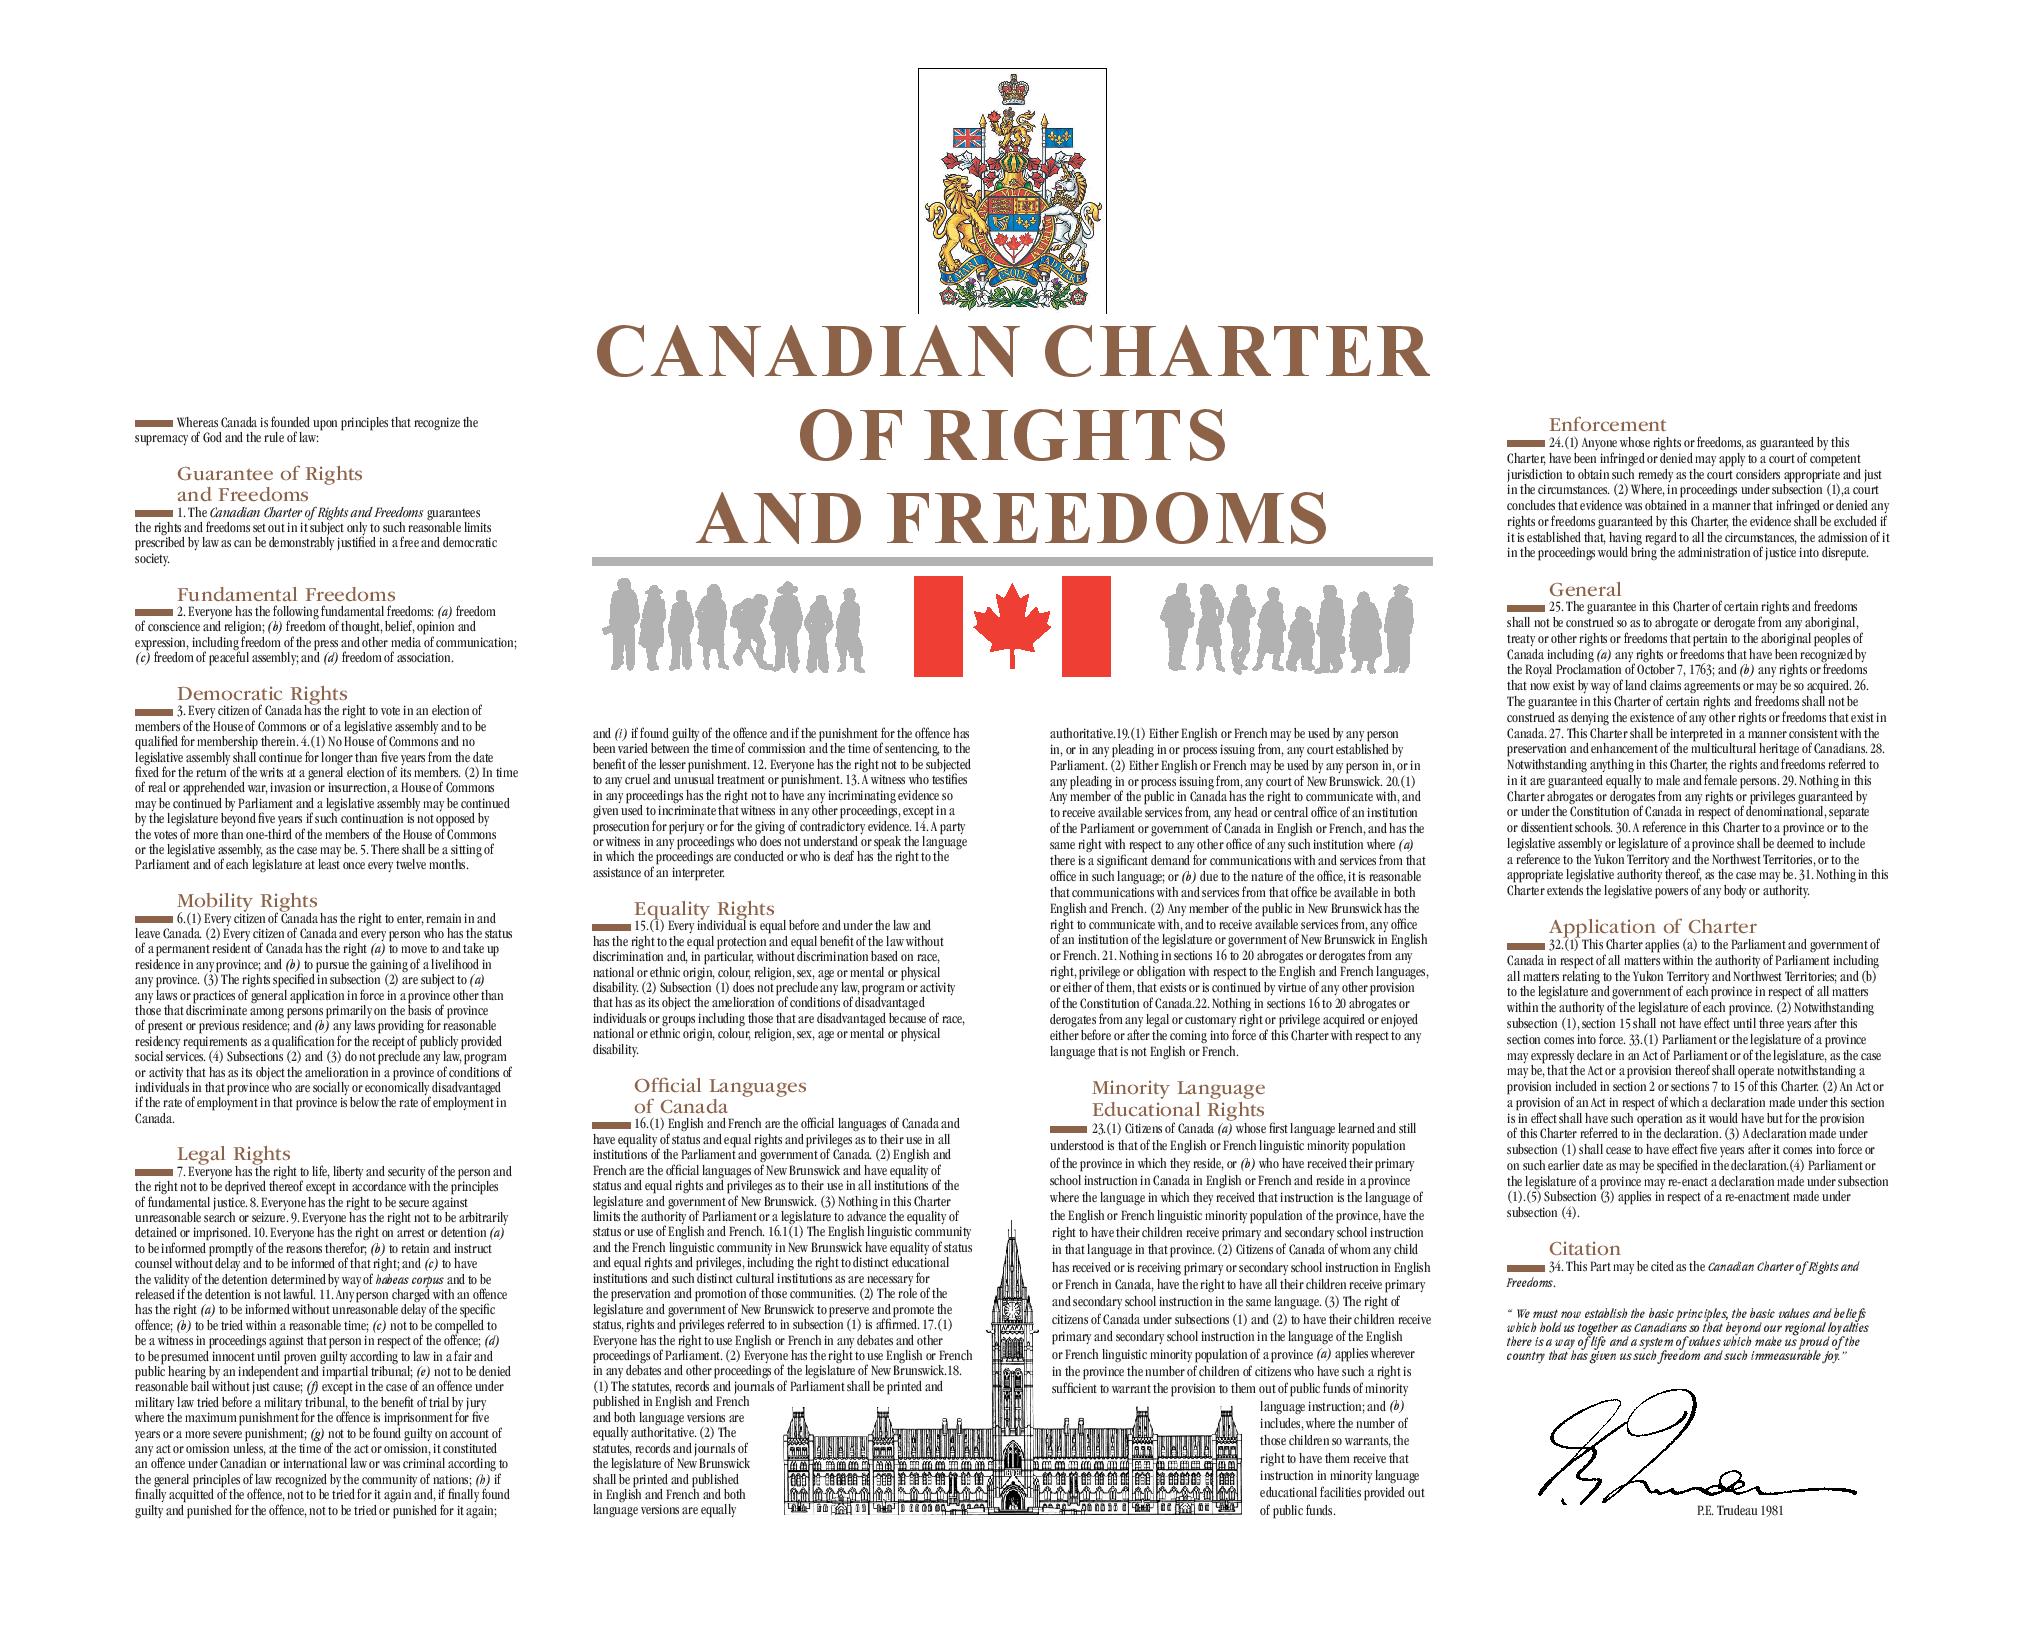 Image of the Canadian Charter of Rights and Freedoms.